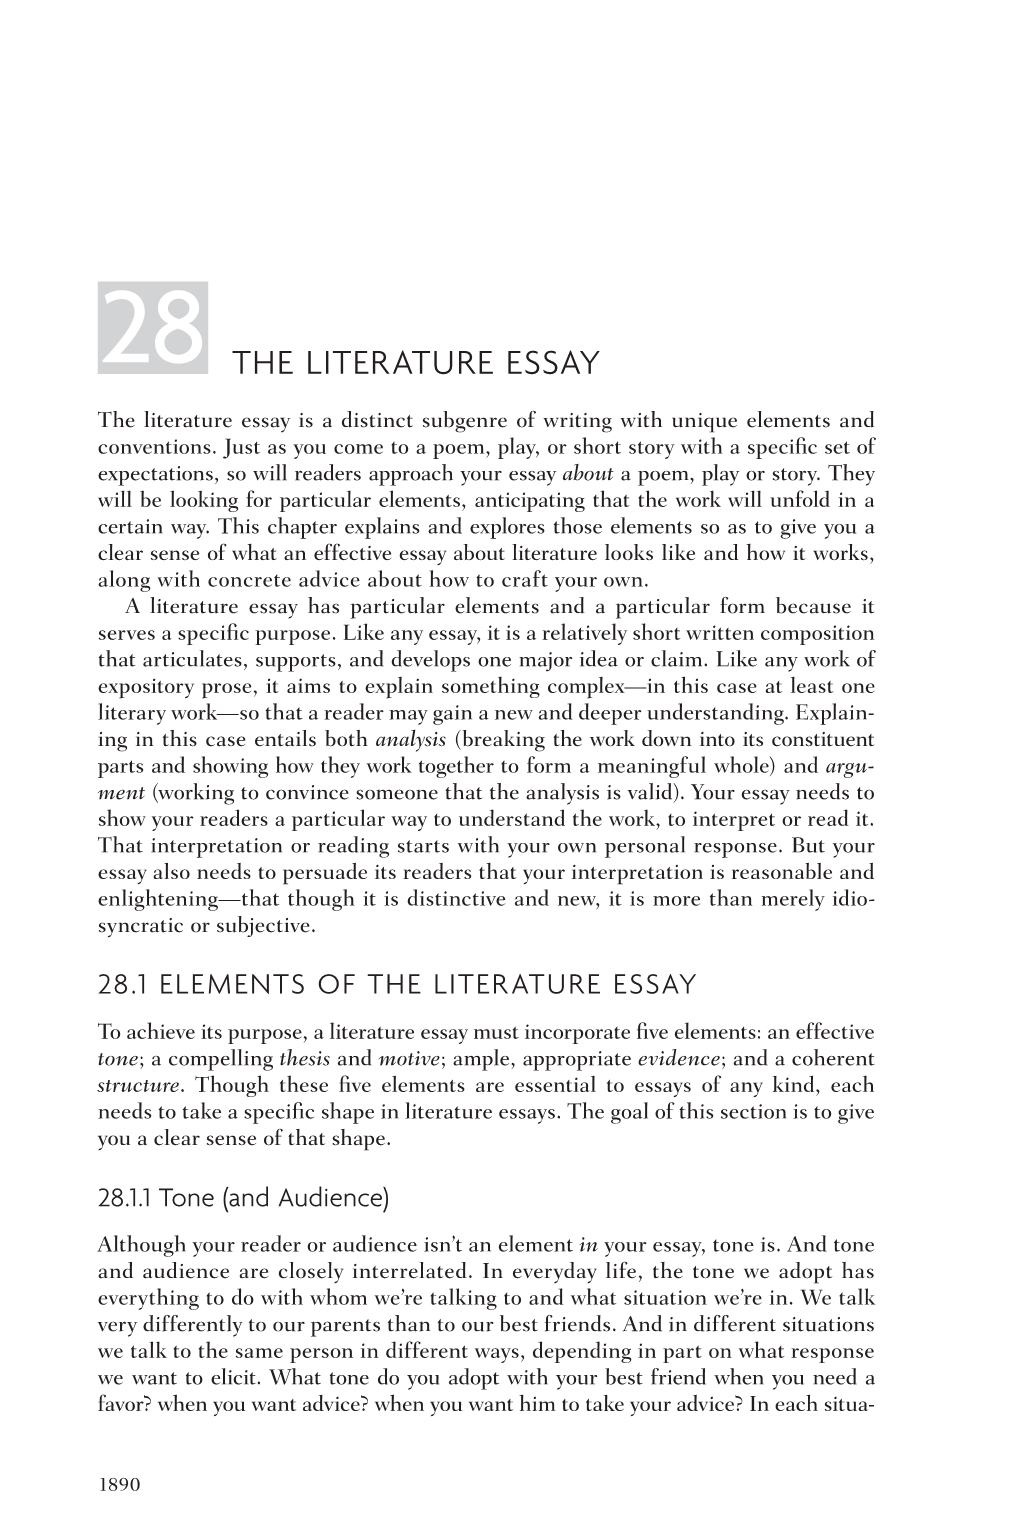 28.1 Ele Ments of the Lit Er a Ture Essay